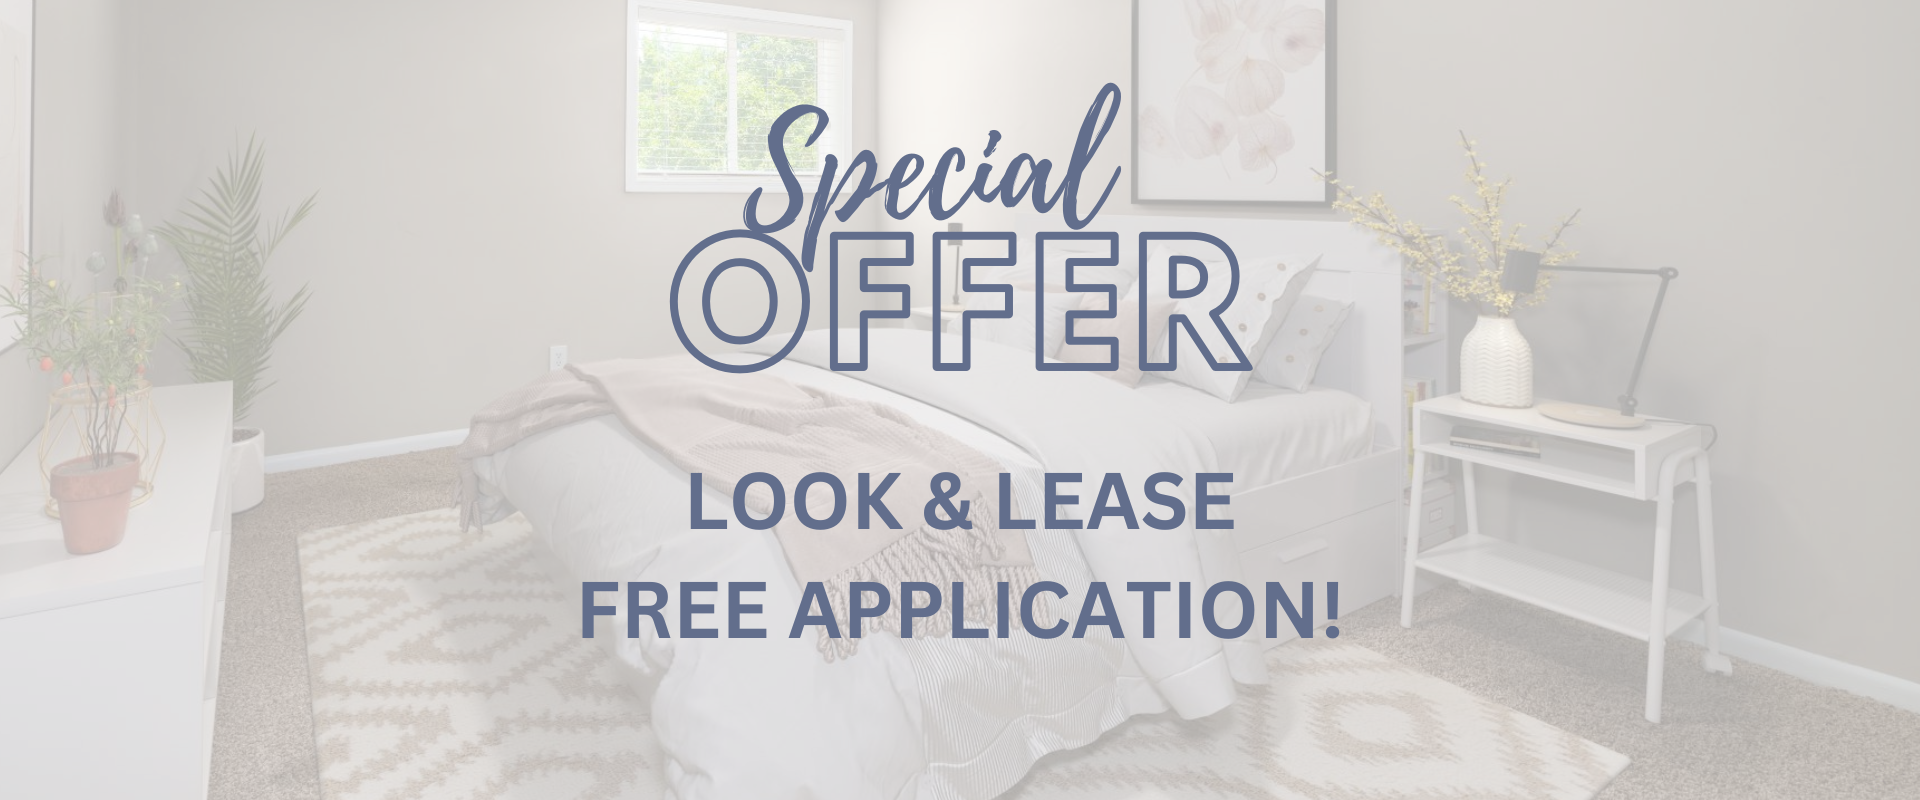 look & lease, free application